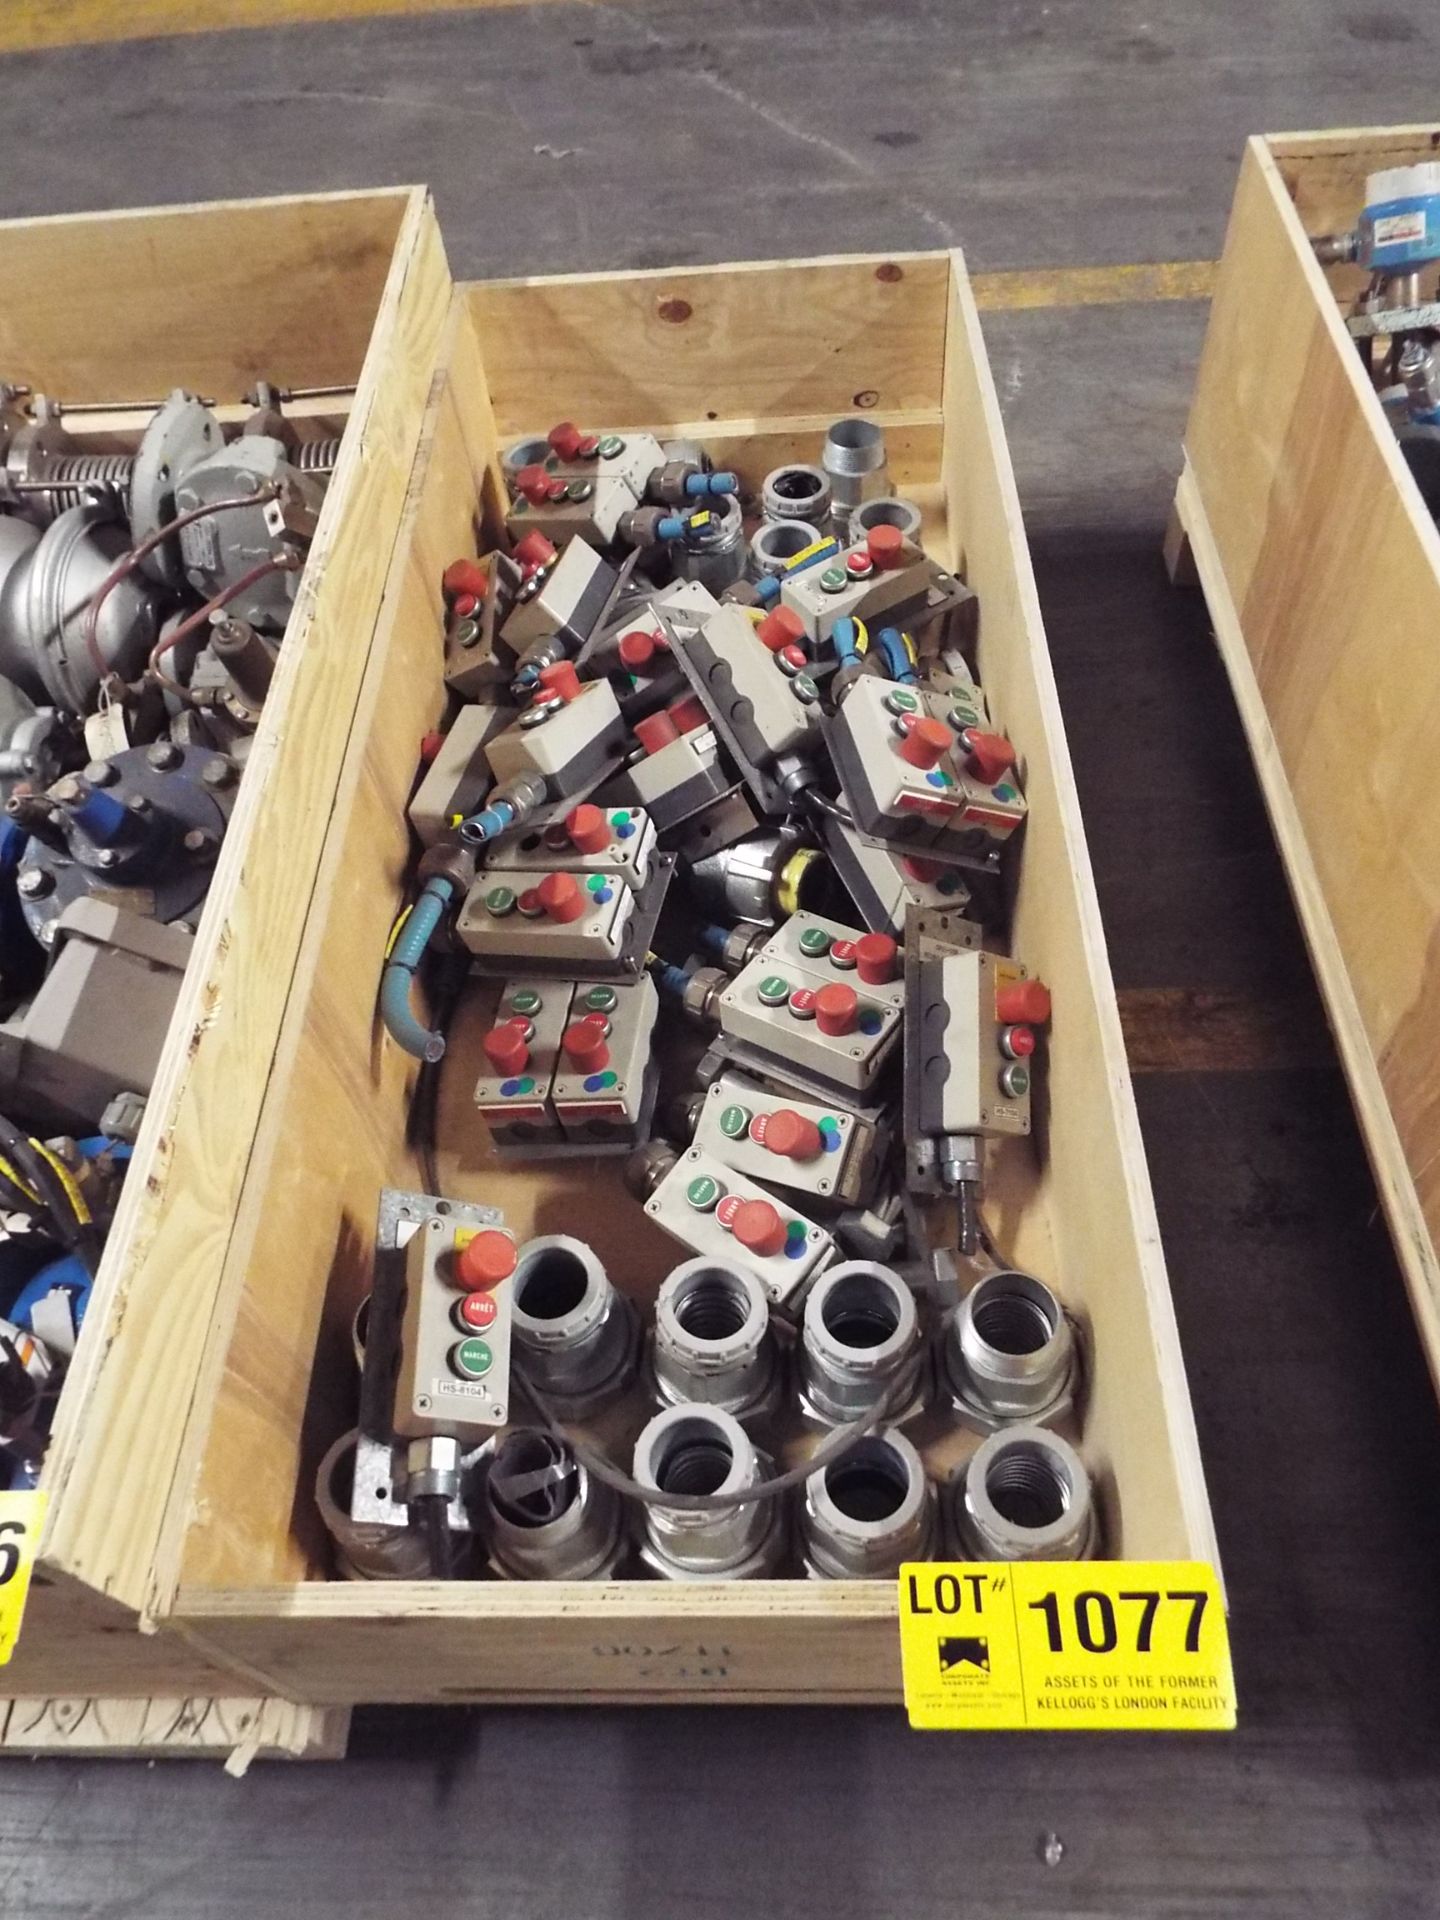 LOT/ CONTENTS OF SKID - CONNECTORS AND POWER SWITCHES